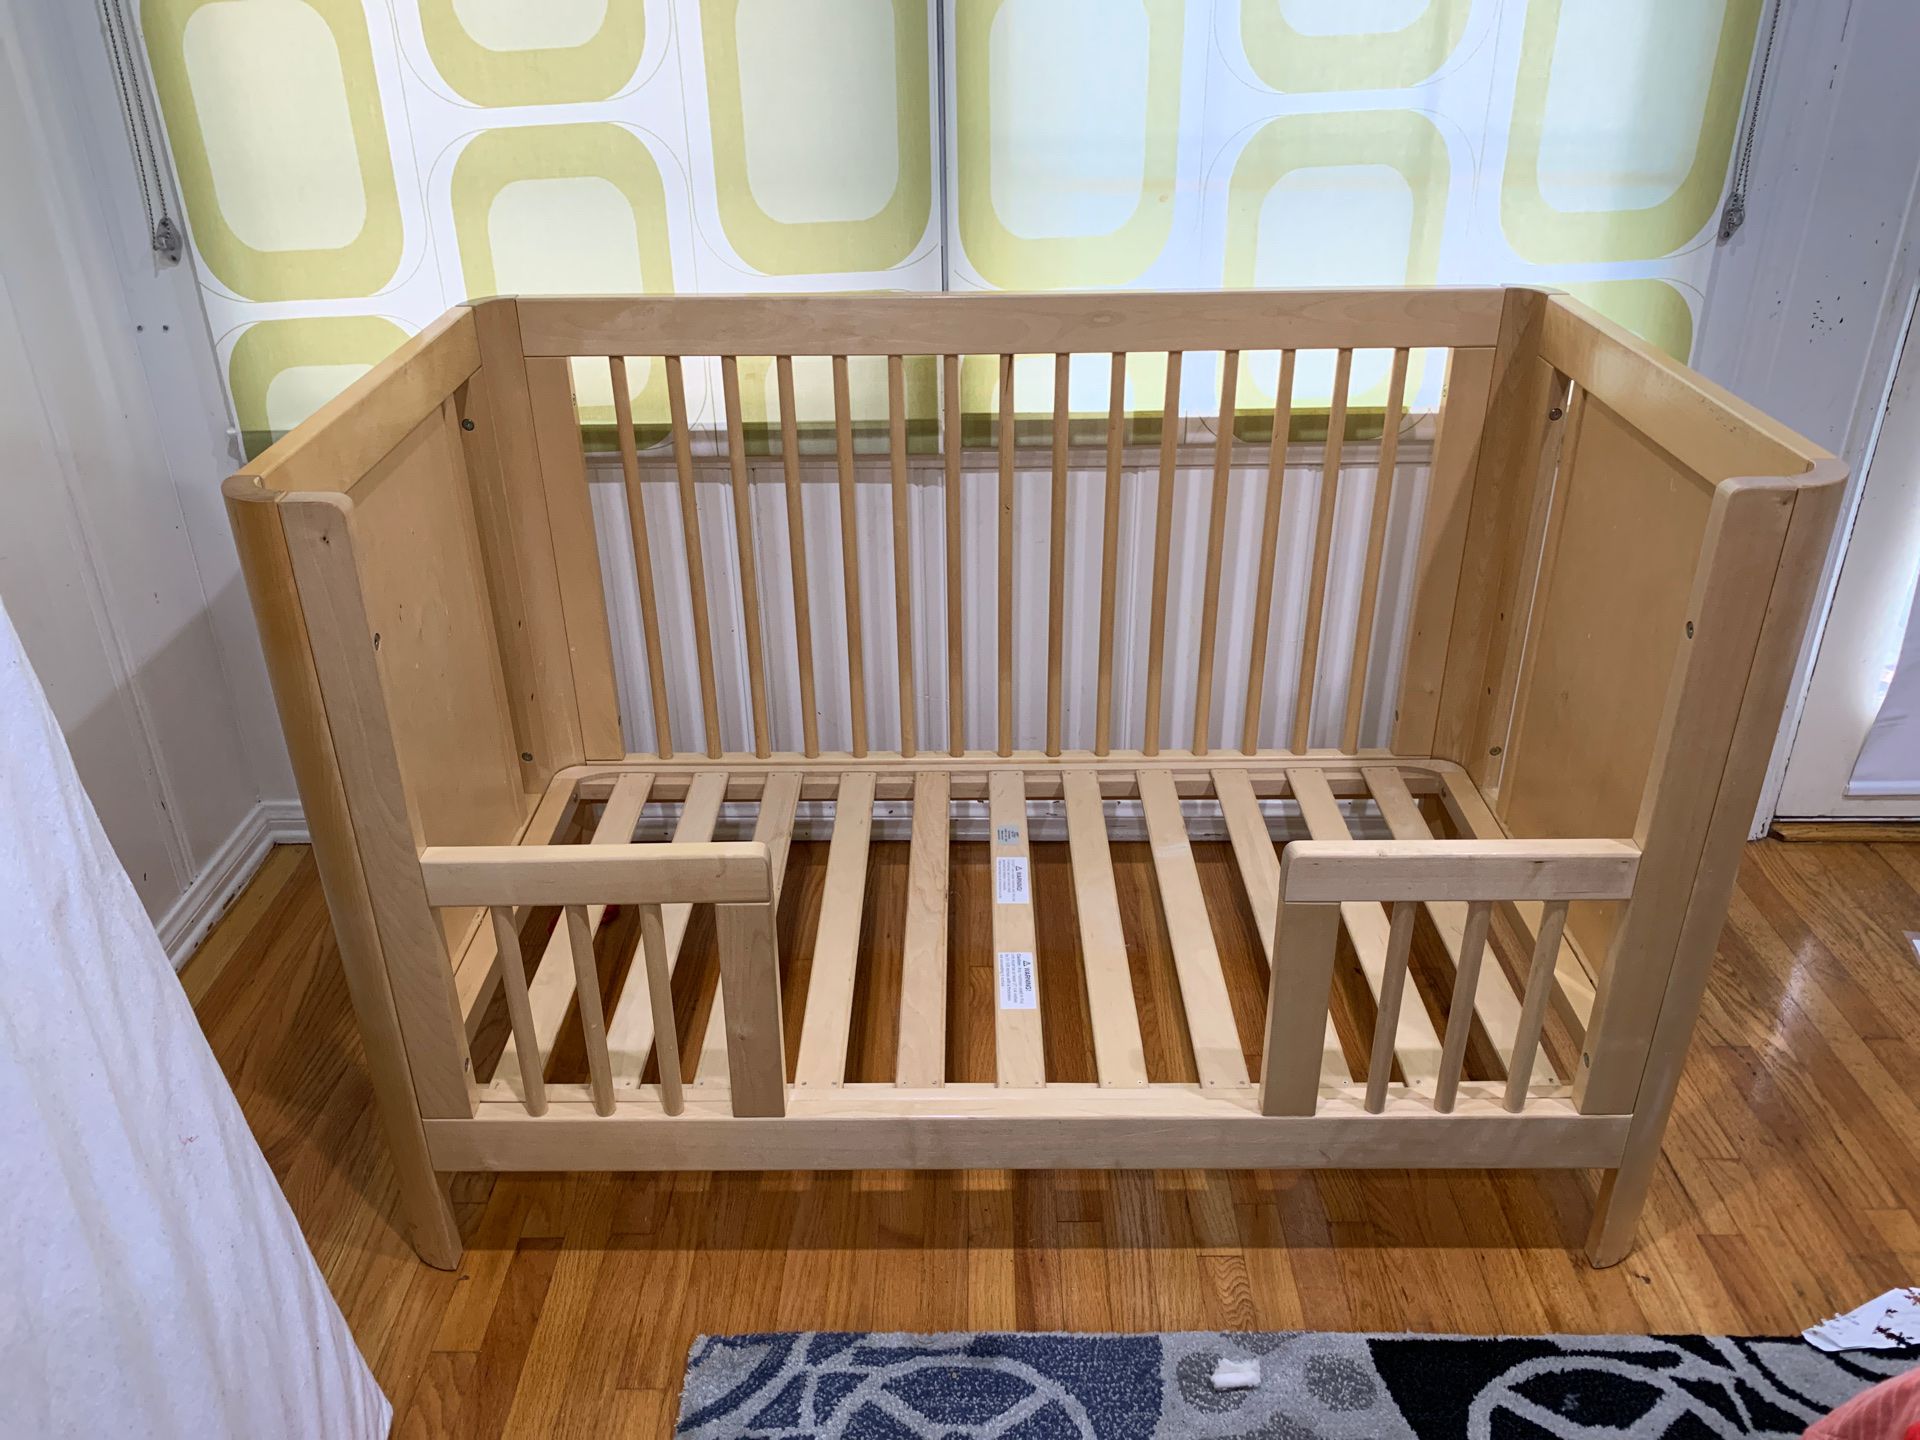 Troll convertible toddler bed. In great shape. I have the mattress and full baby wall as well. It’s in toddler mode now. Pick up only. Cash only